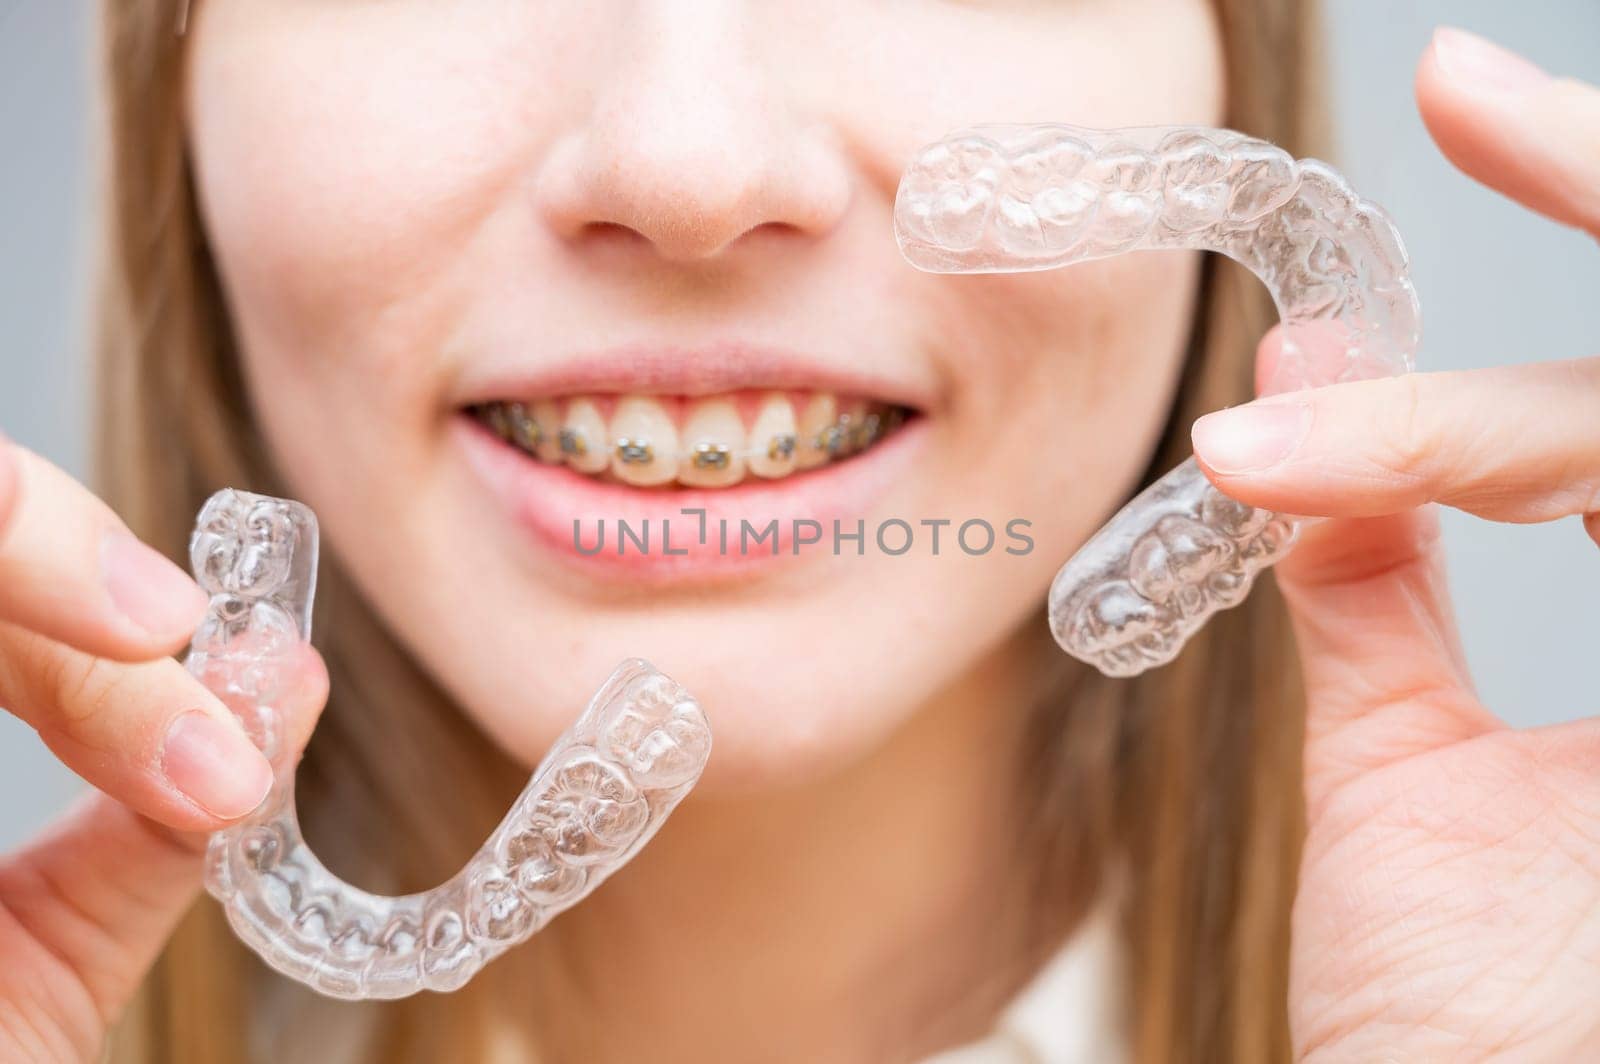 Woman with braces on her teeth holding and removable transparent aligners